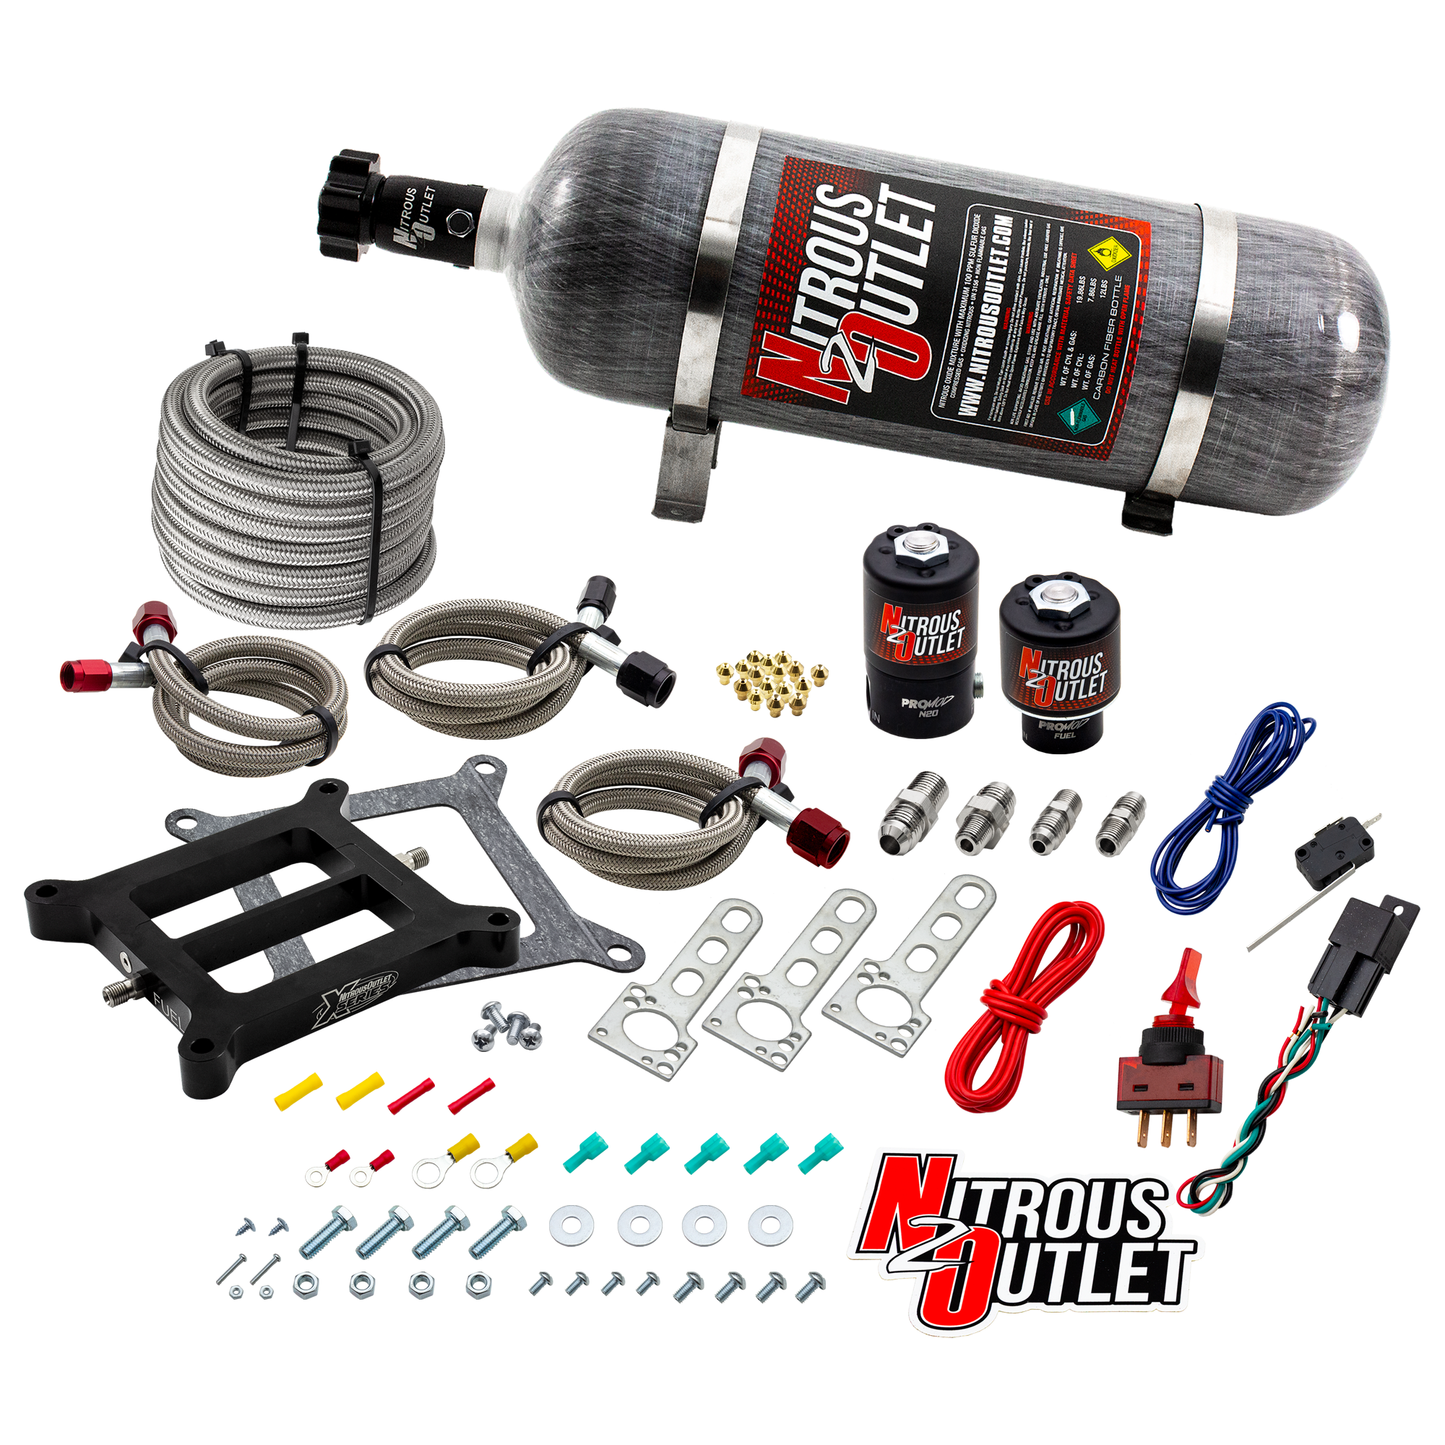 Nitrous Outlet Weekend Warrior Wet 4150 Nitrous Plate System